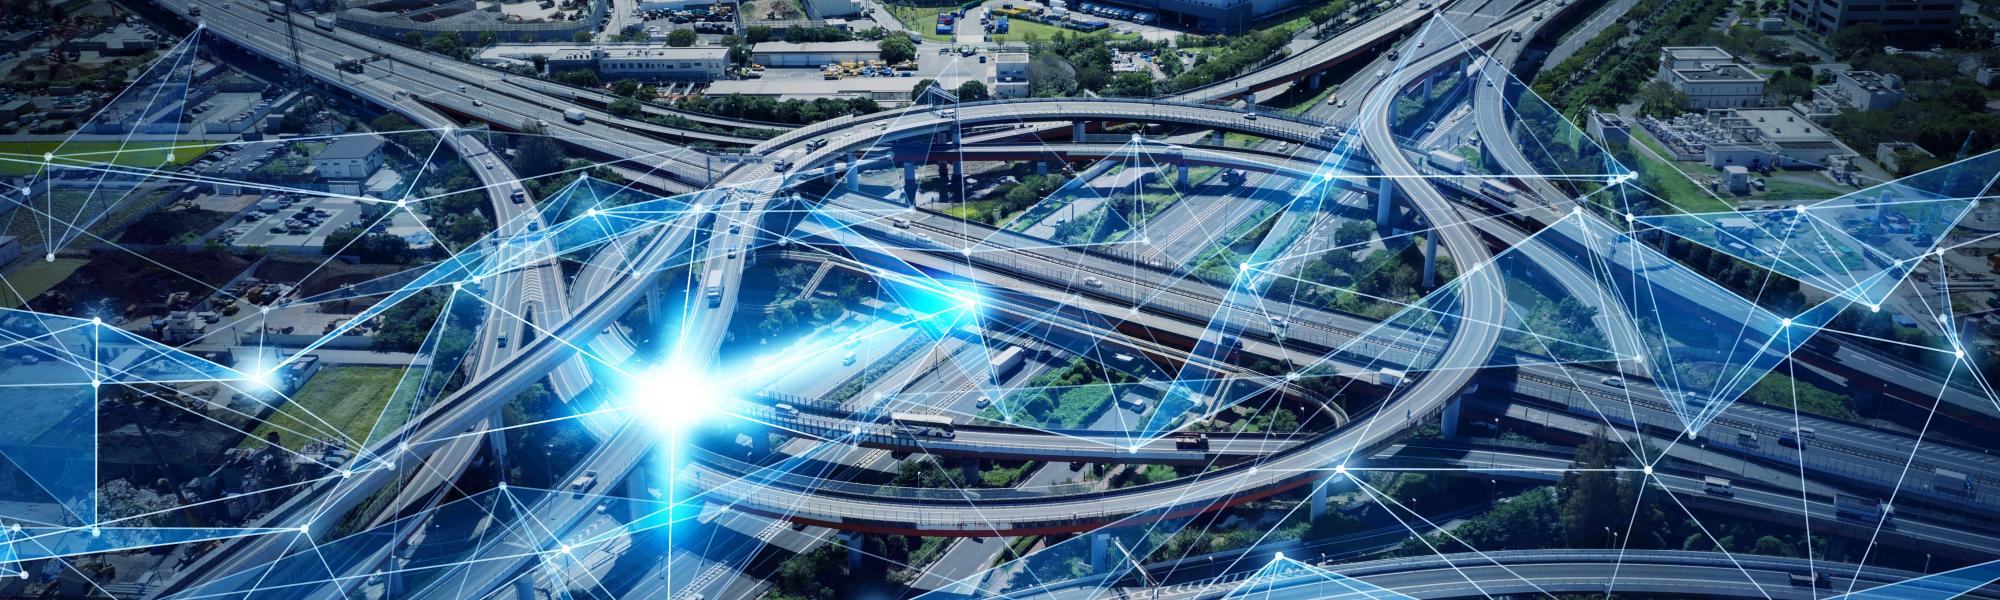 Demystifying digital in the future of mobility and transport